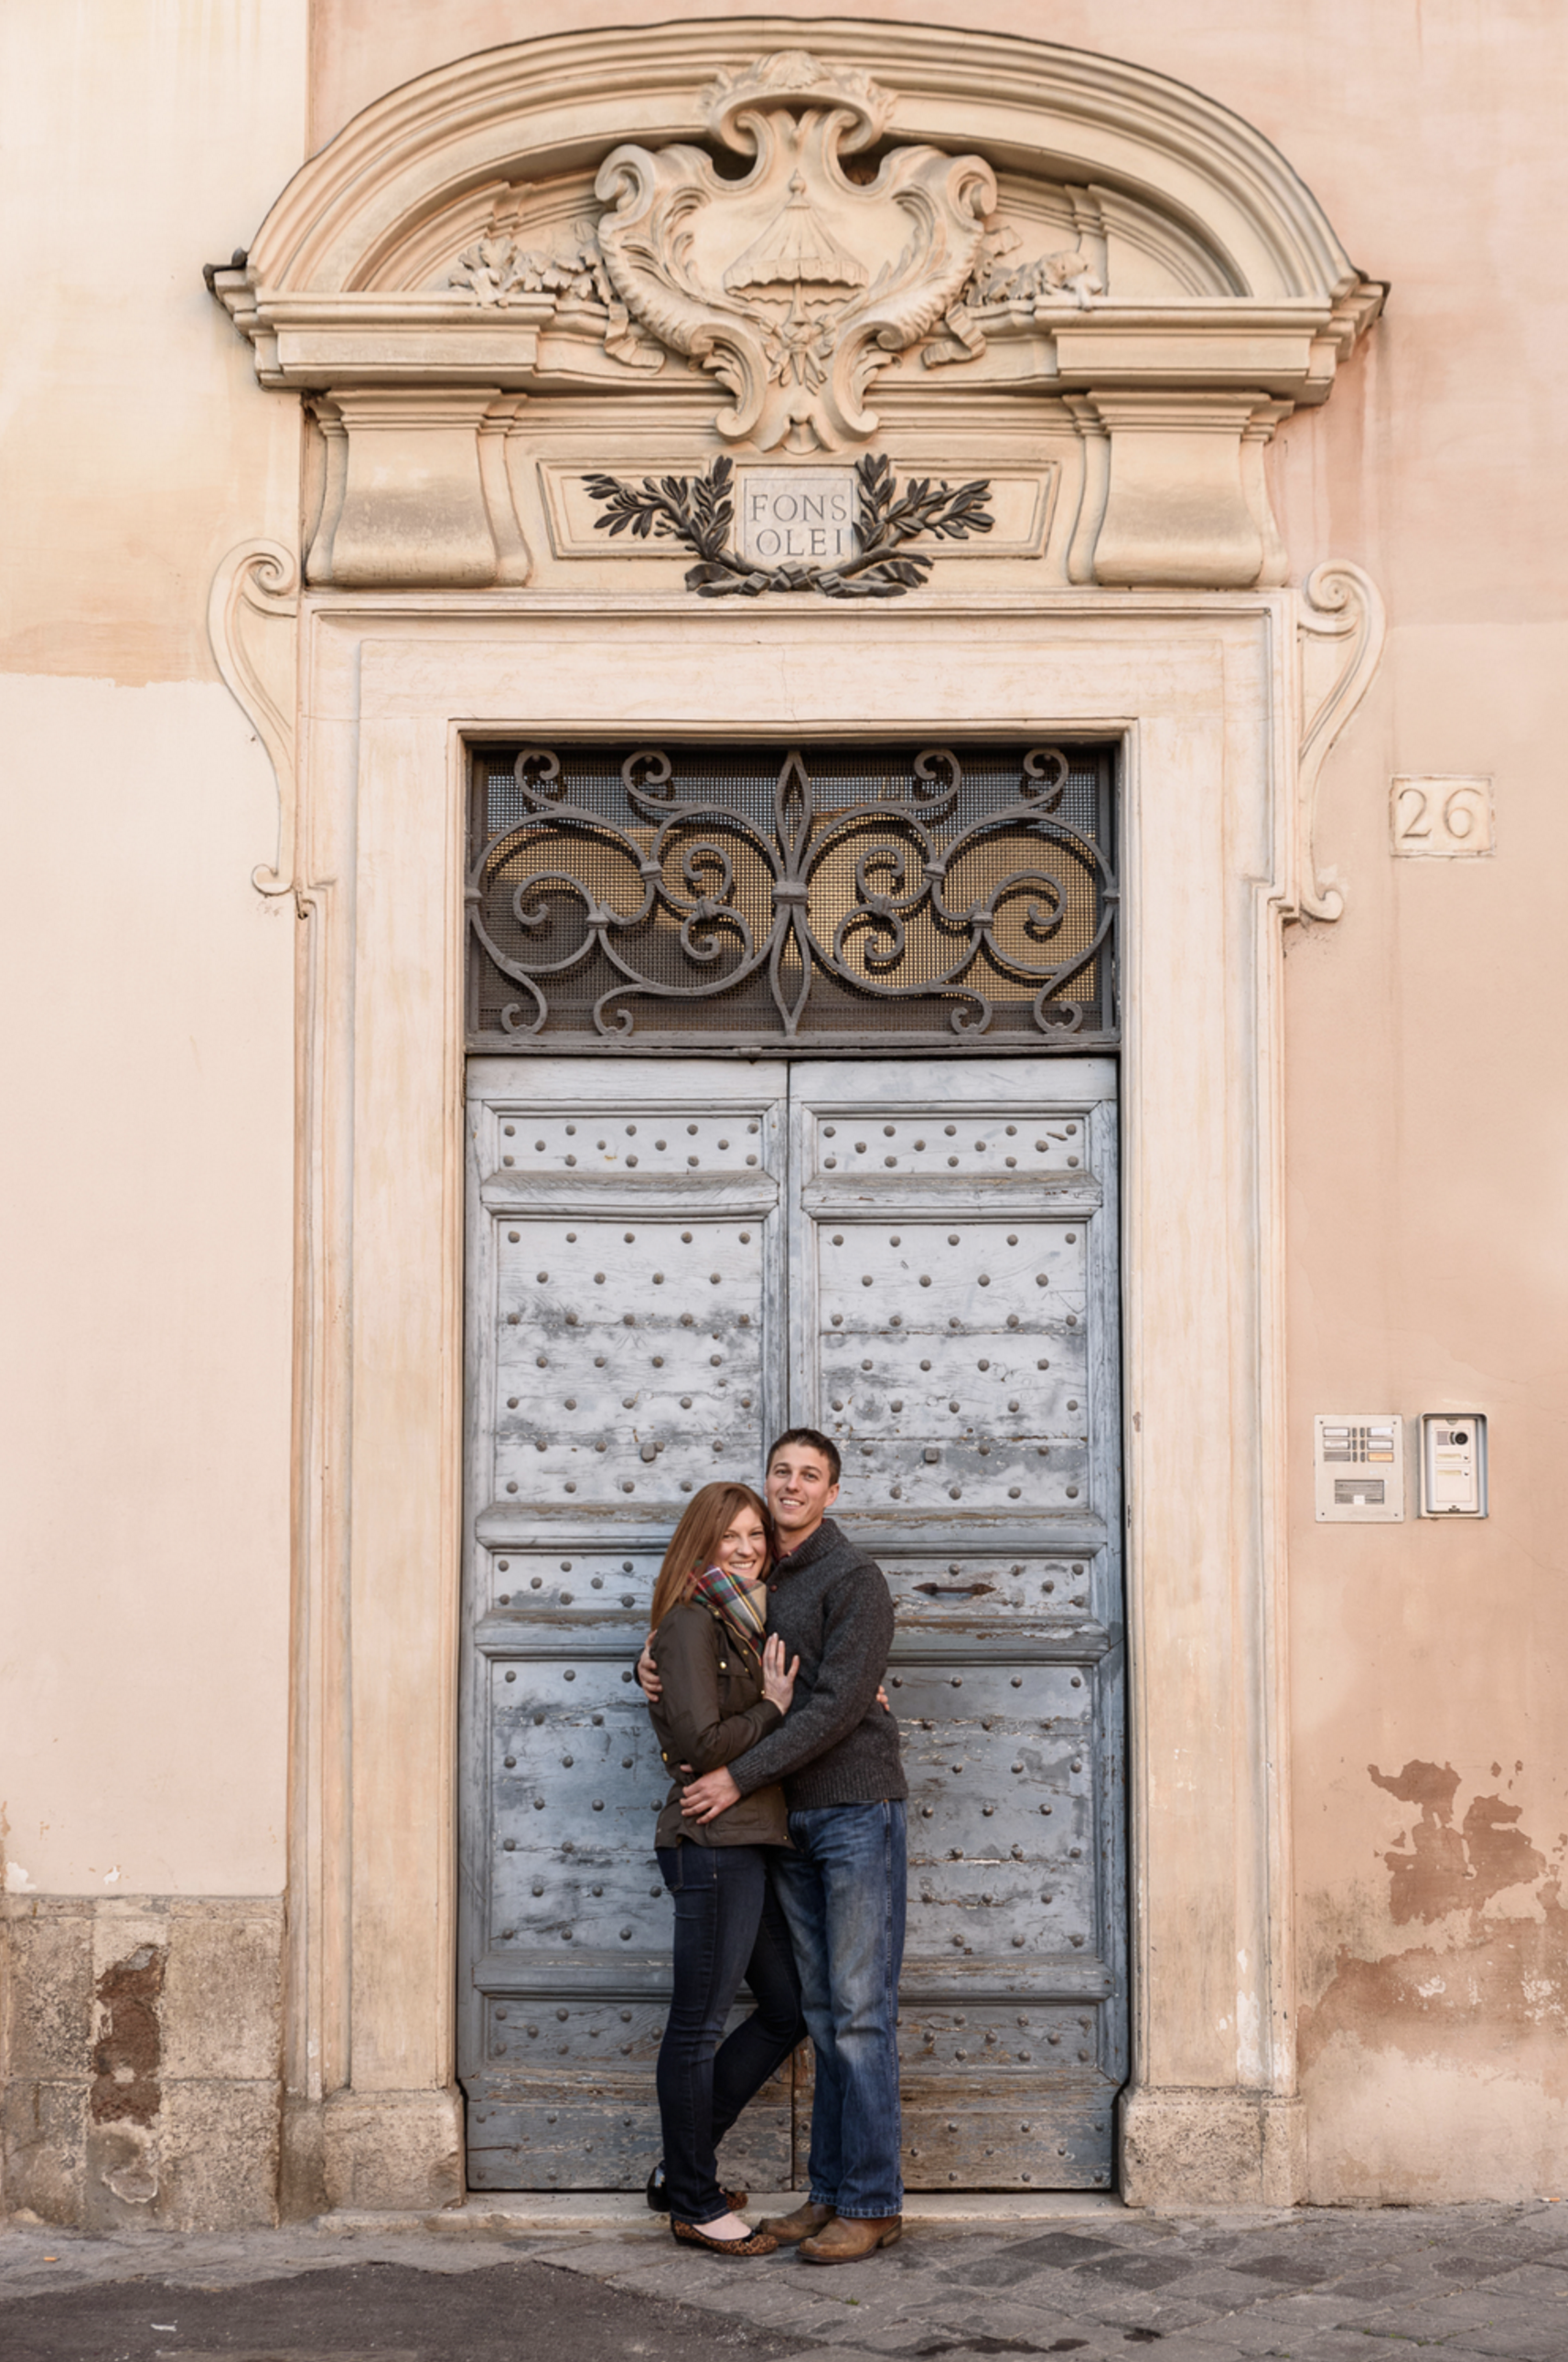  Flytographer:  Siobhan in Rome  